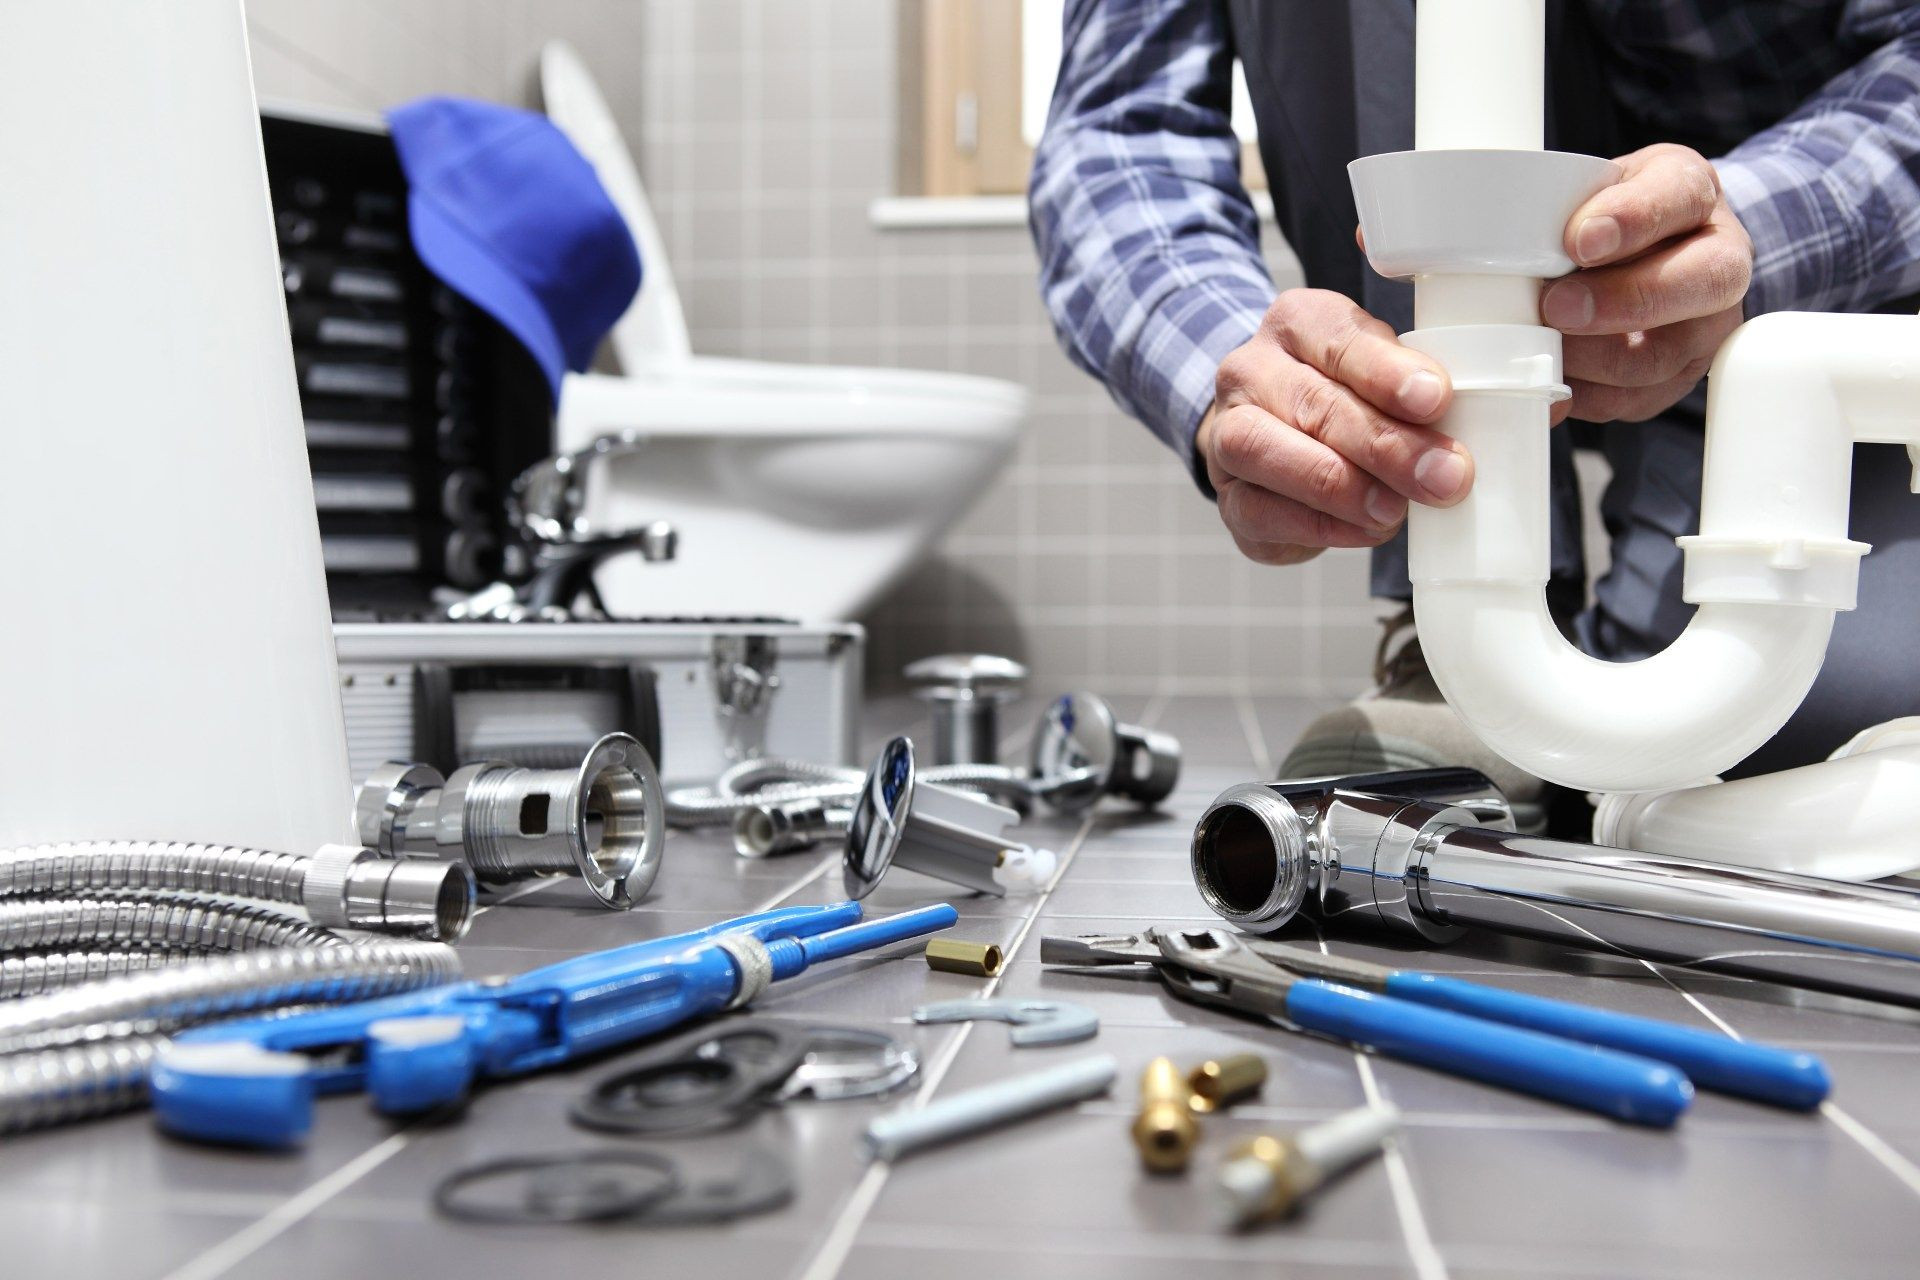 Commercial plumbing Montreal in Montreal, Westmount, Outreot, Rosemont, Kirkland, Dorval, Verdun, Lasalle, ... and surrounding areas - Commercial plumber Montreal